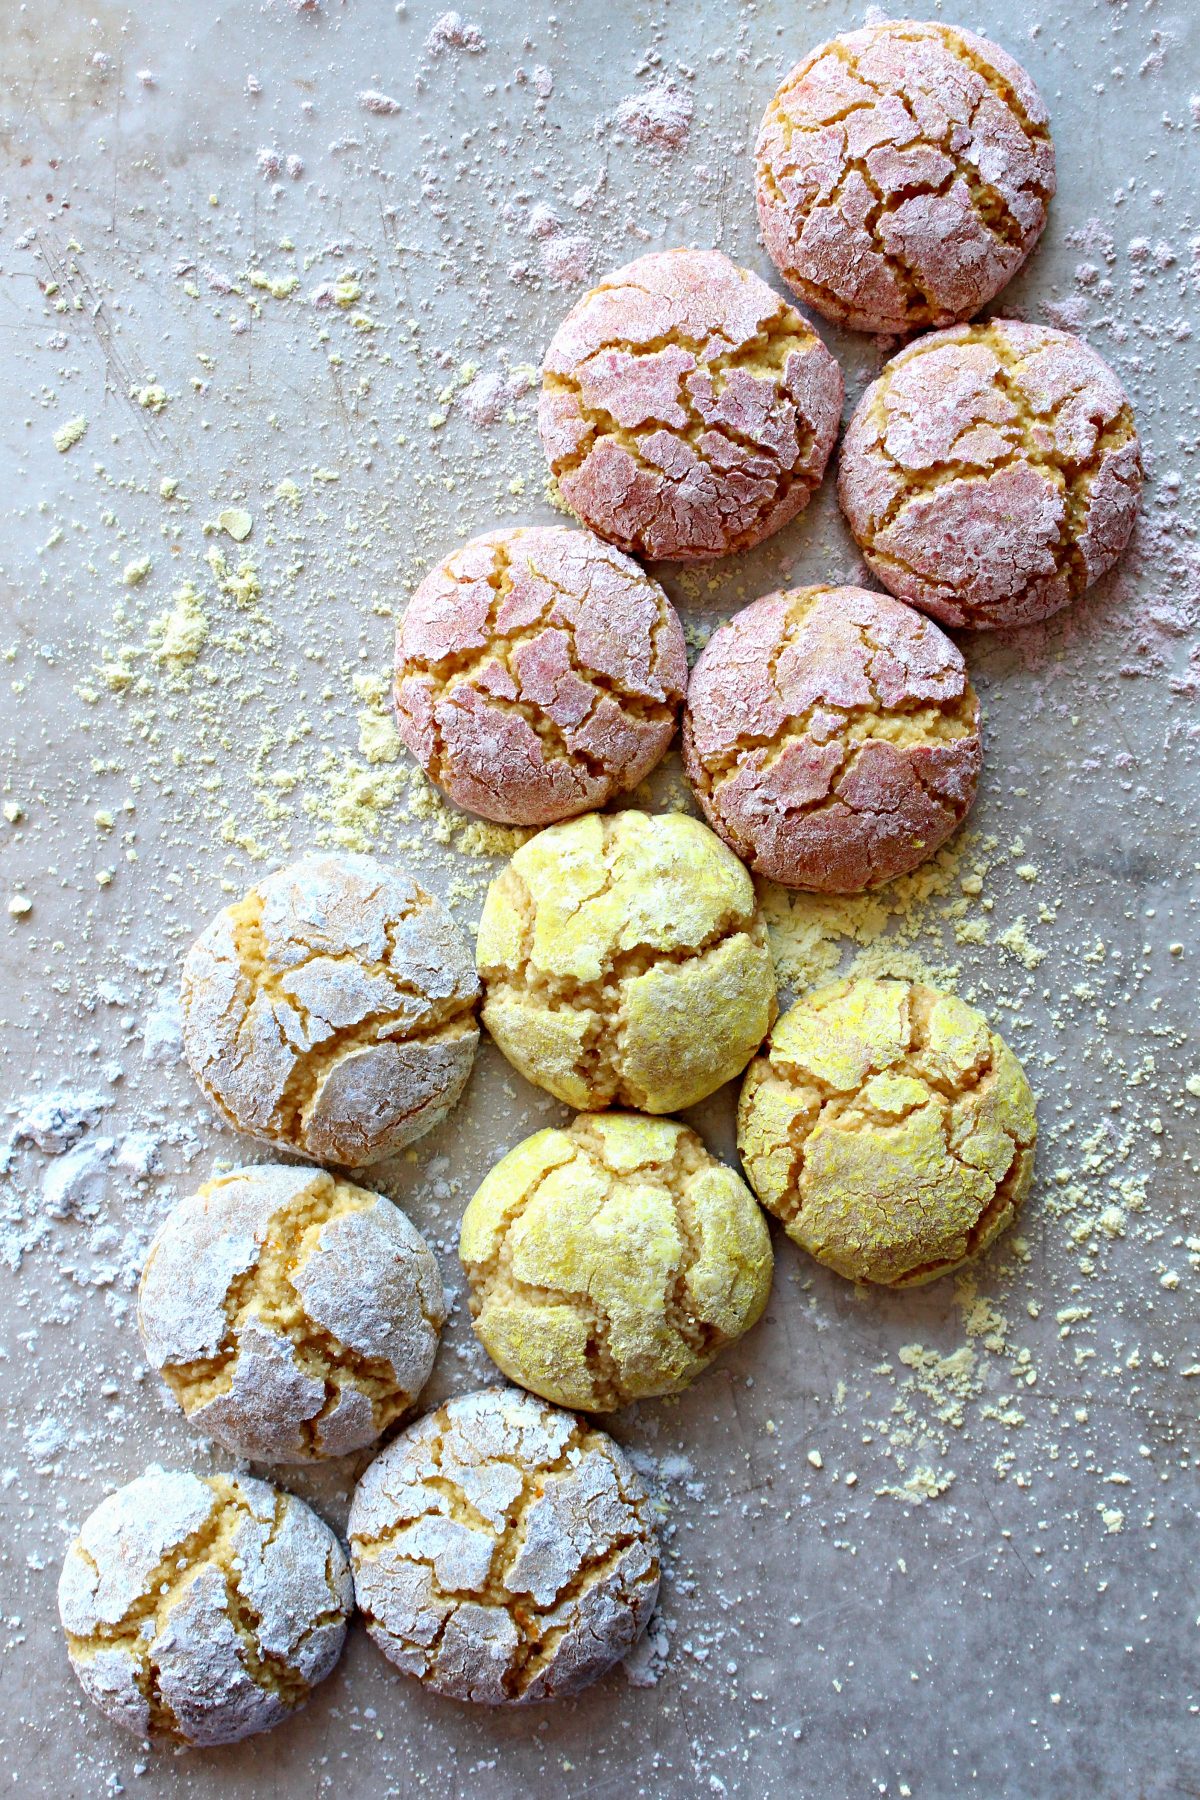 Crackled topped almond cookies coated in pastel colored powdered sugar.